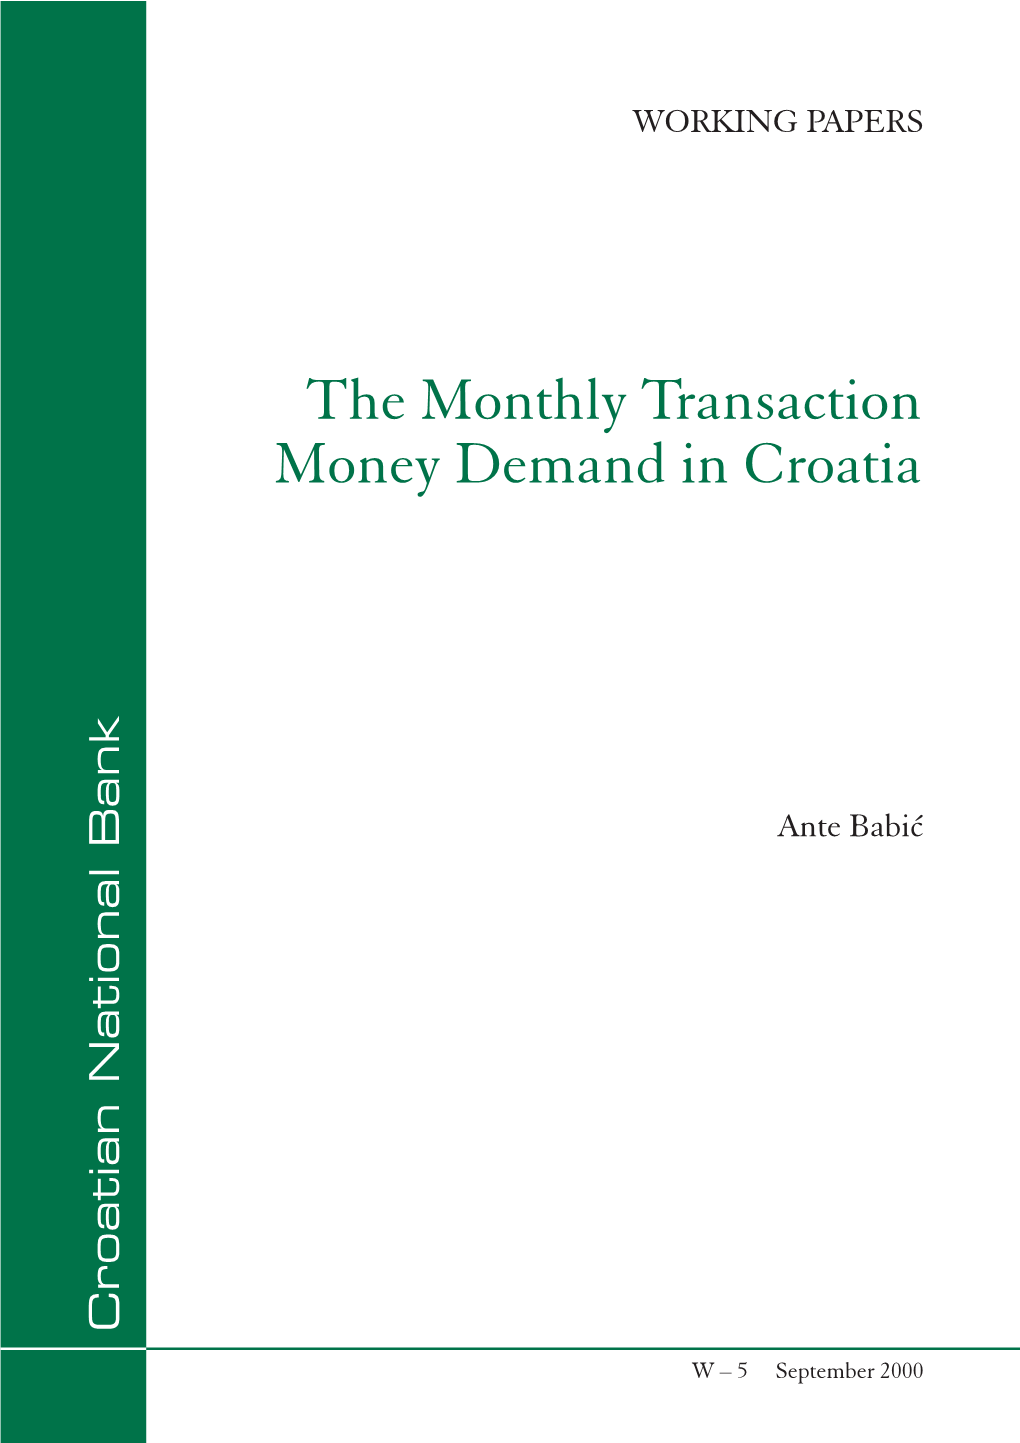 The Monthly Transaction Money Demand in Croatia